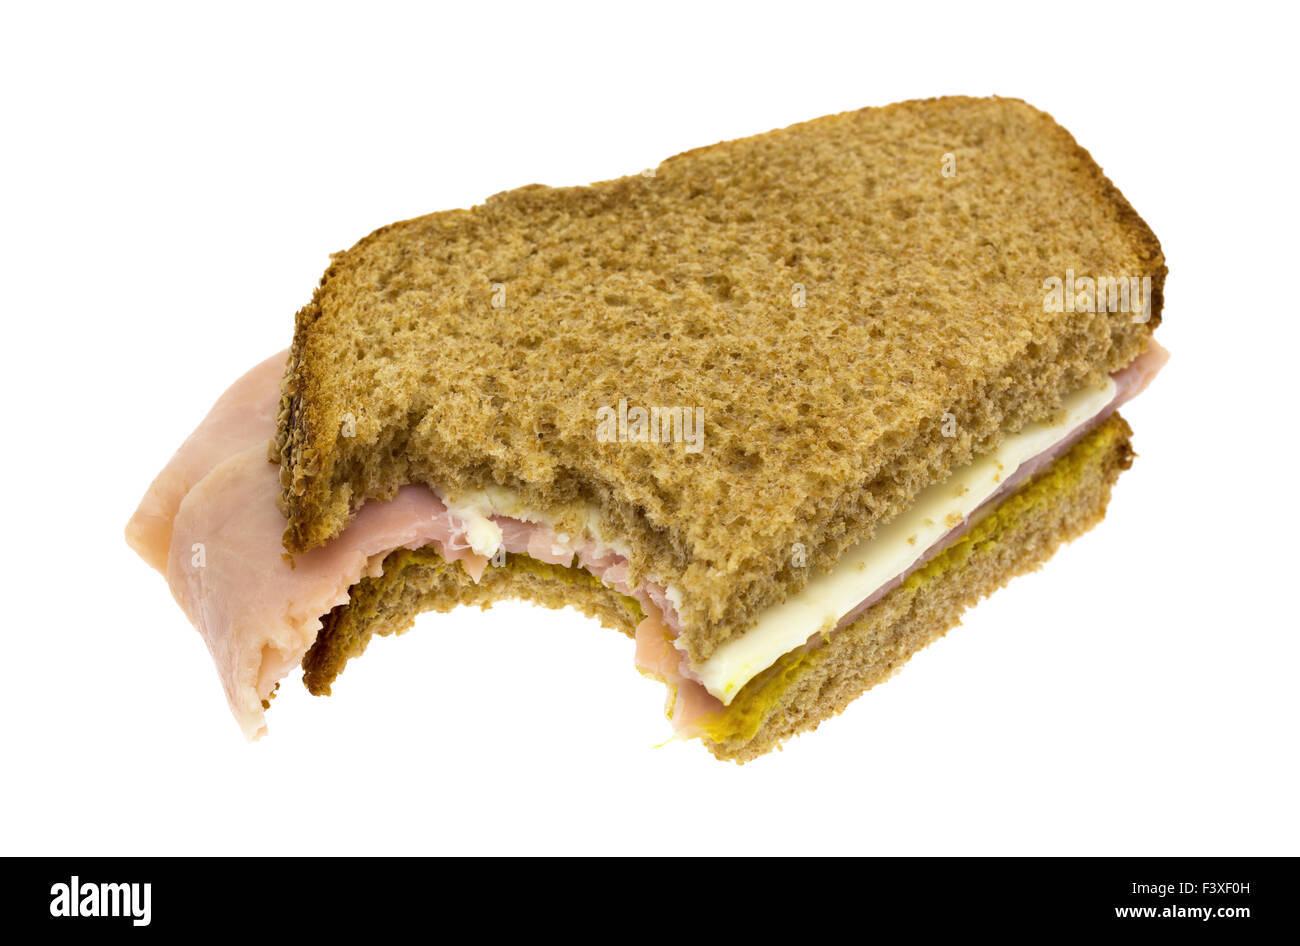 A ham and cheese sandwich that has been bitten once isolated on a white background. Stock Photo